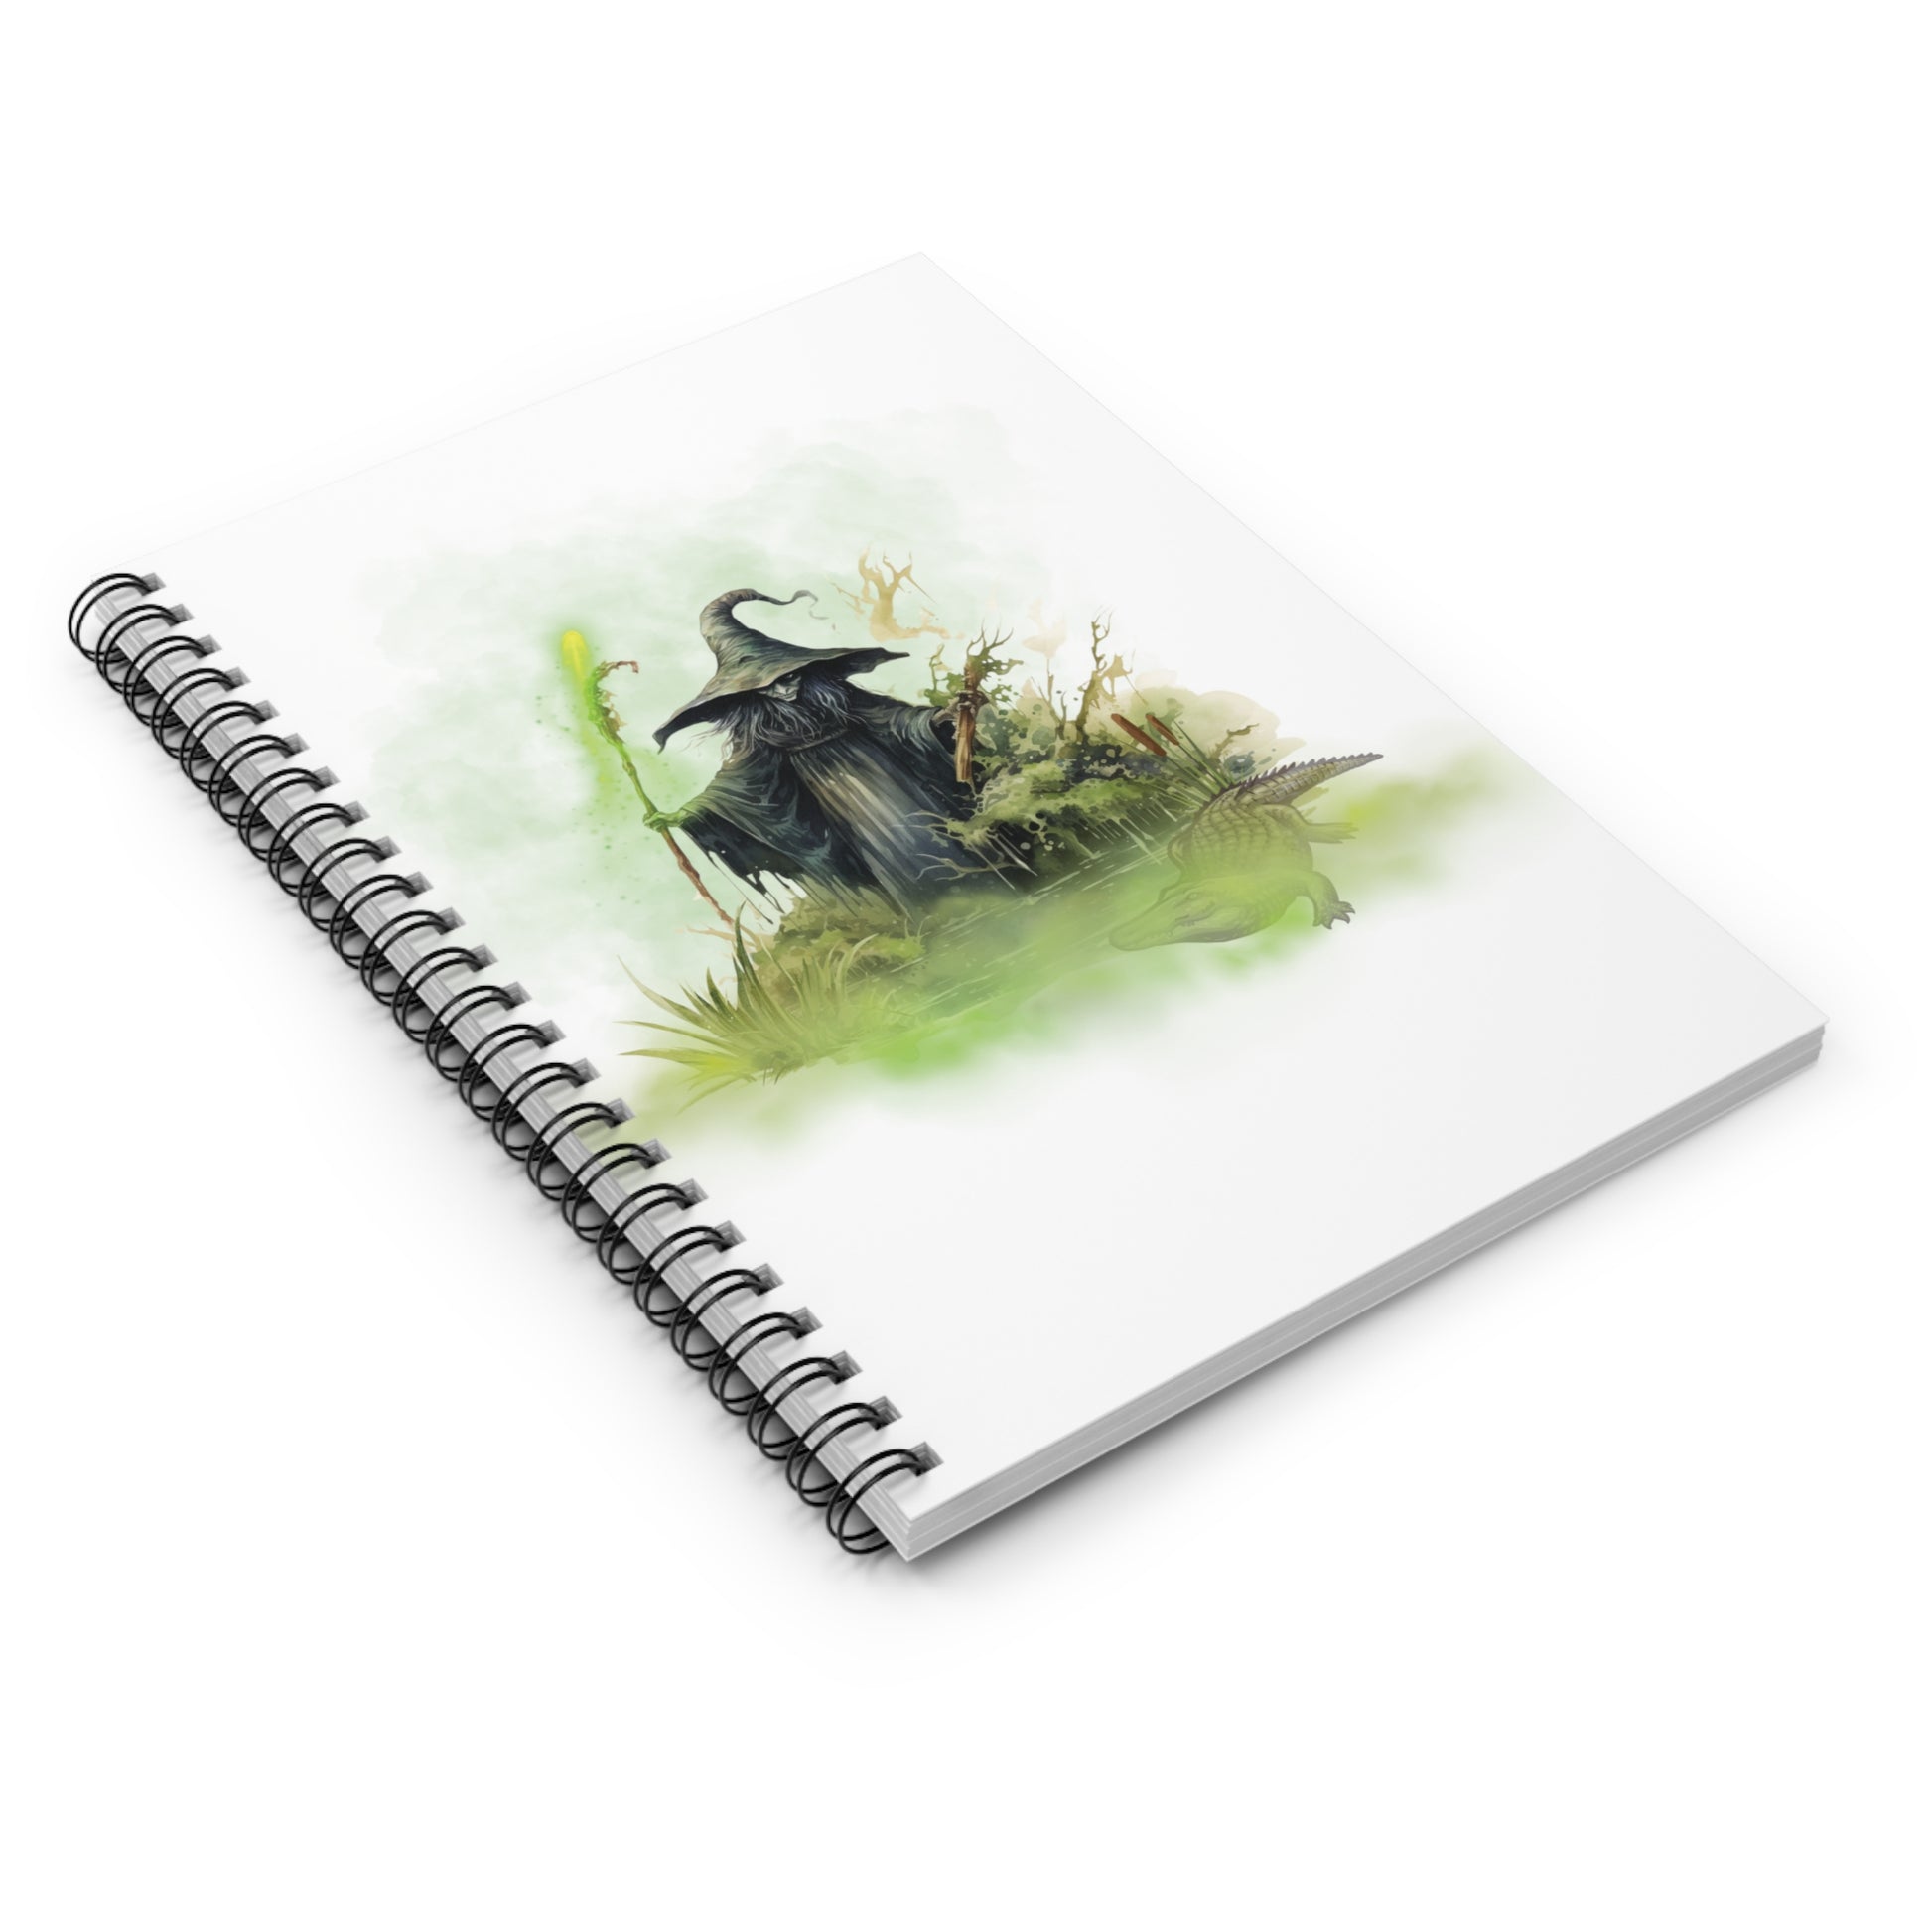 Swamp Witch: Spiral Notebook - Log Books - Journals - Diaries - and More Custom Printed by TheGlassyLass